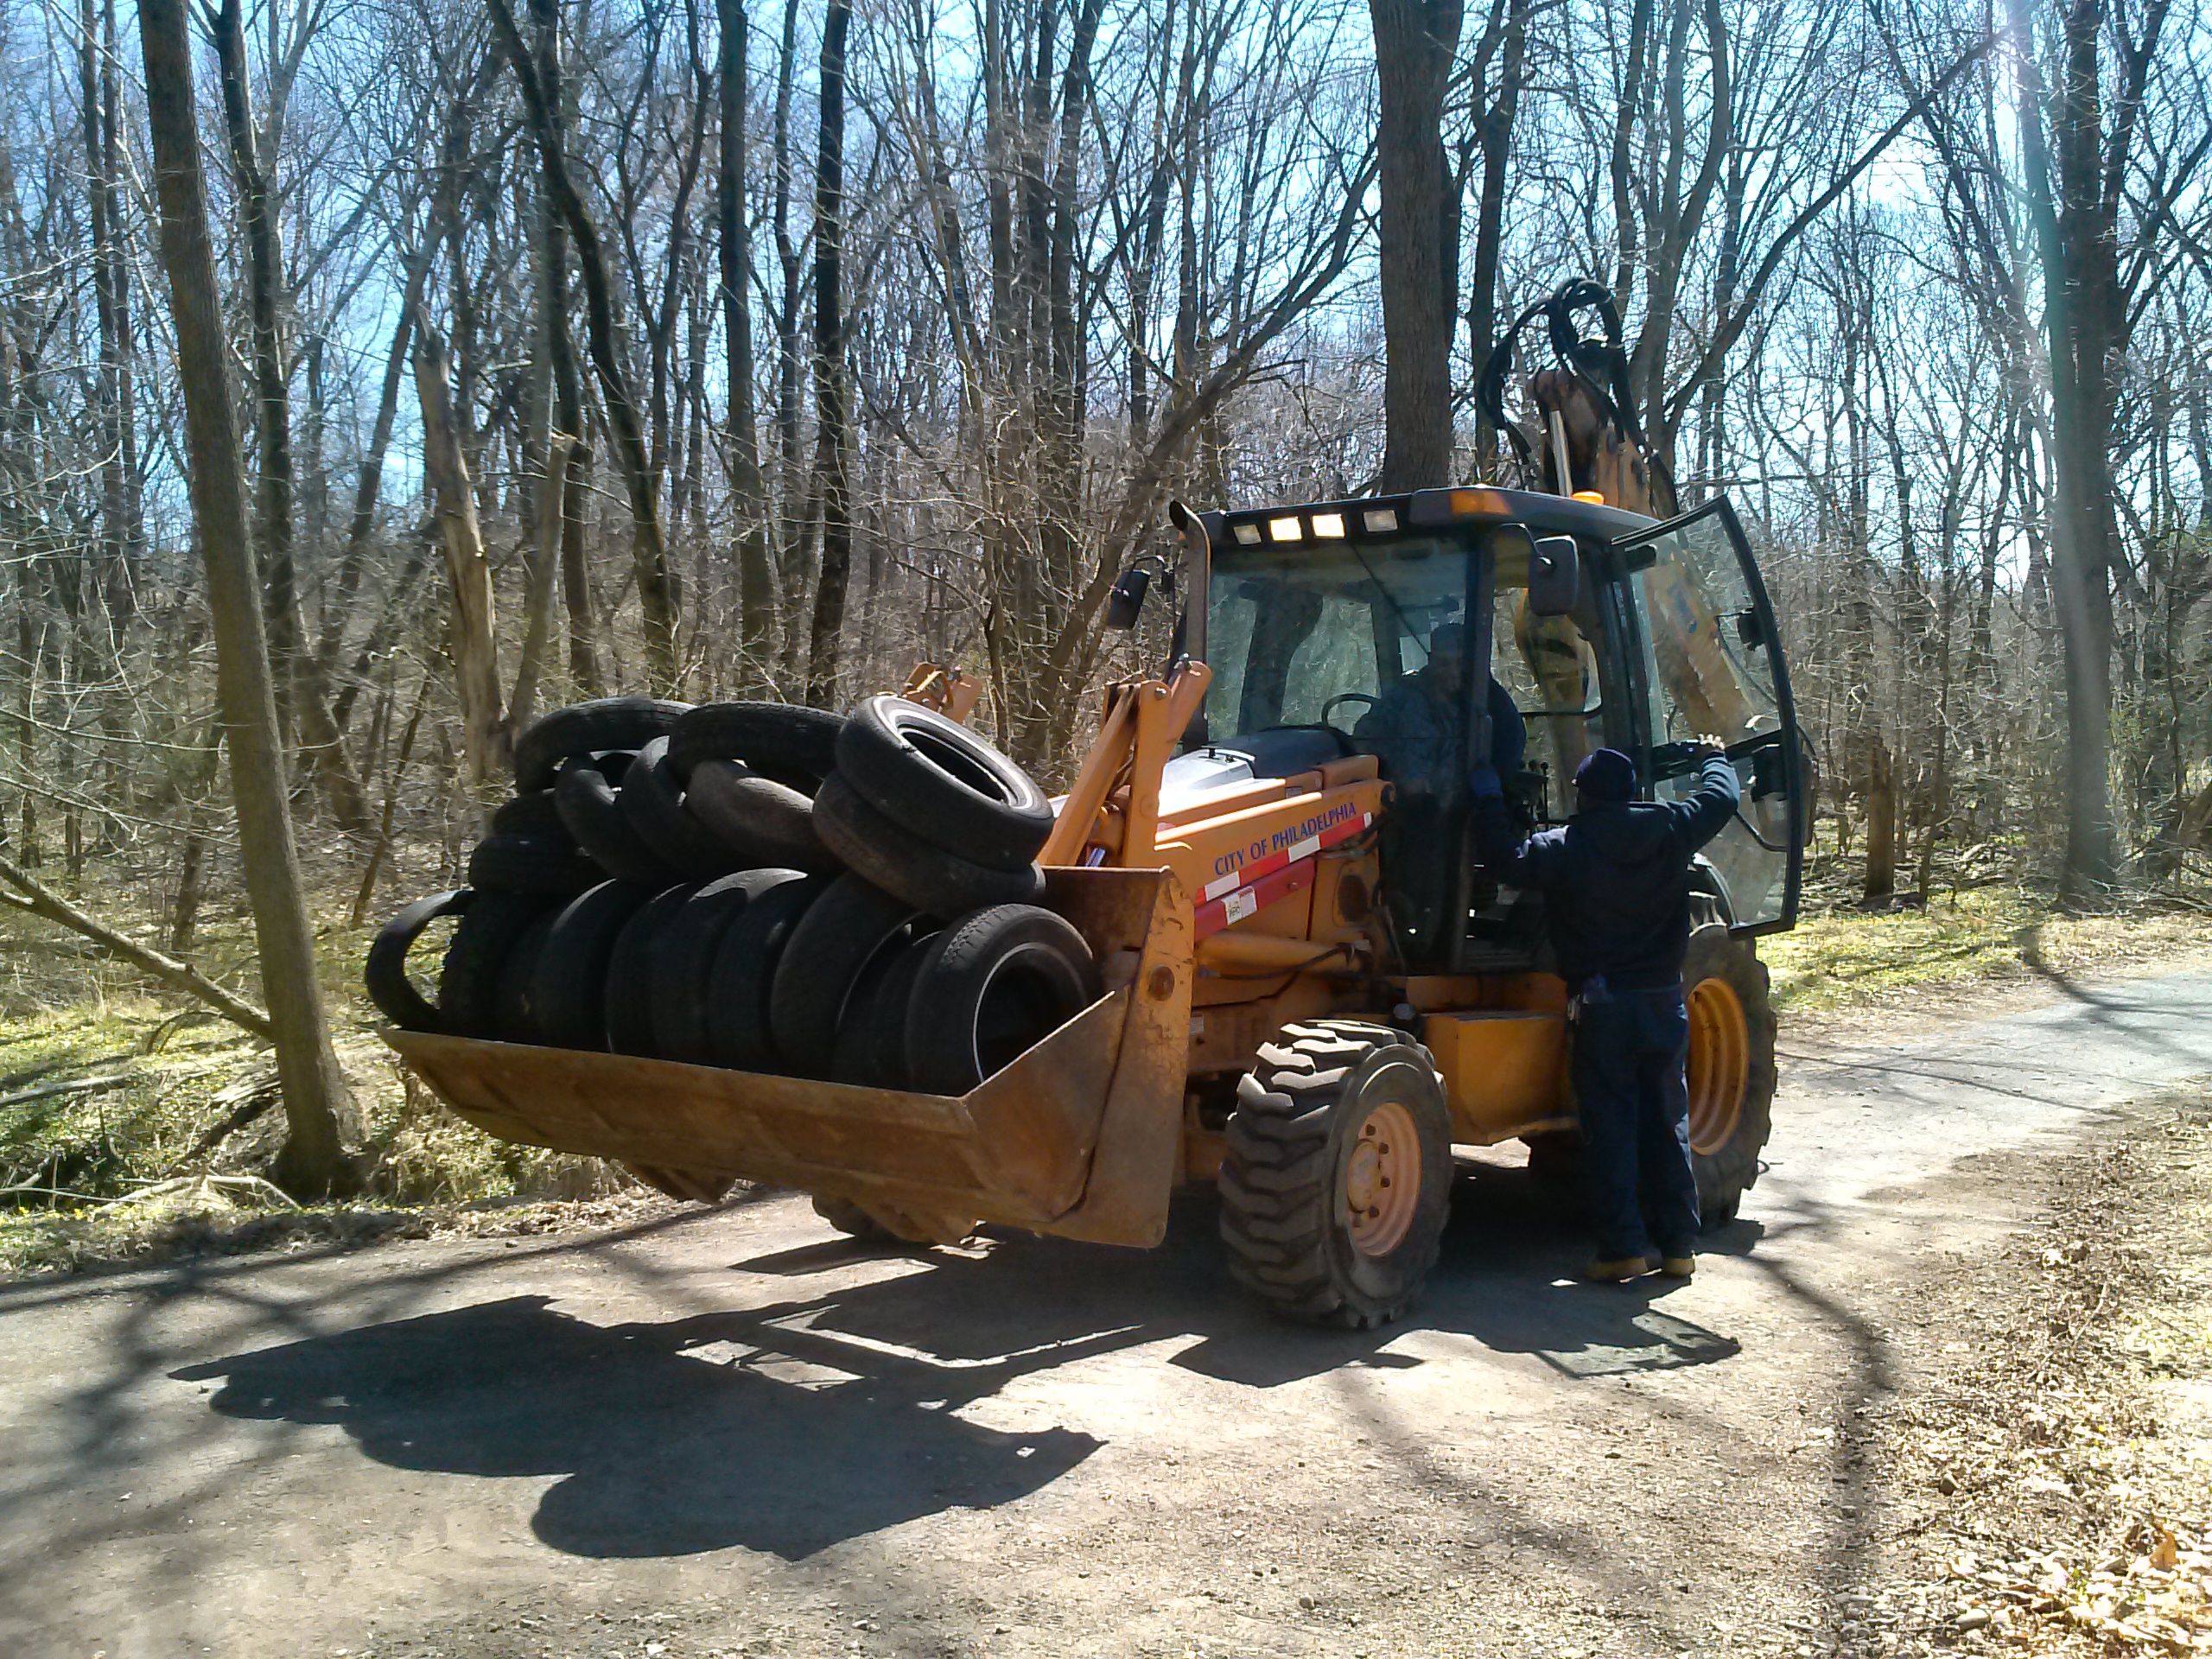 Cleaning up Tacony Creek Park